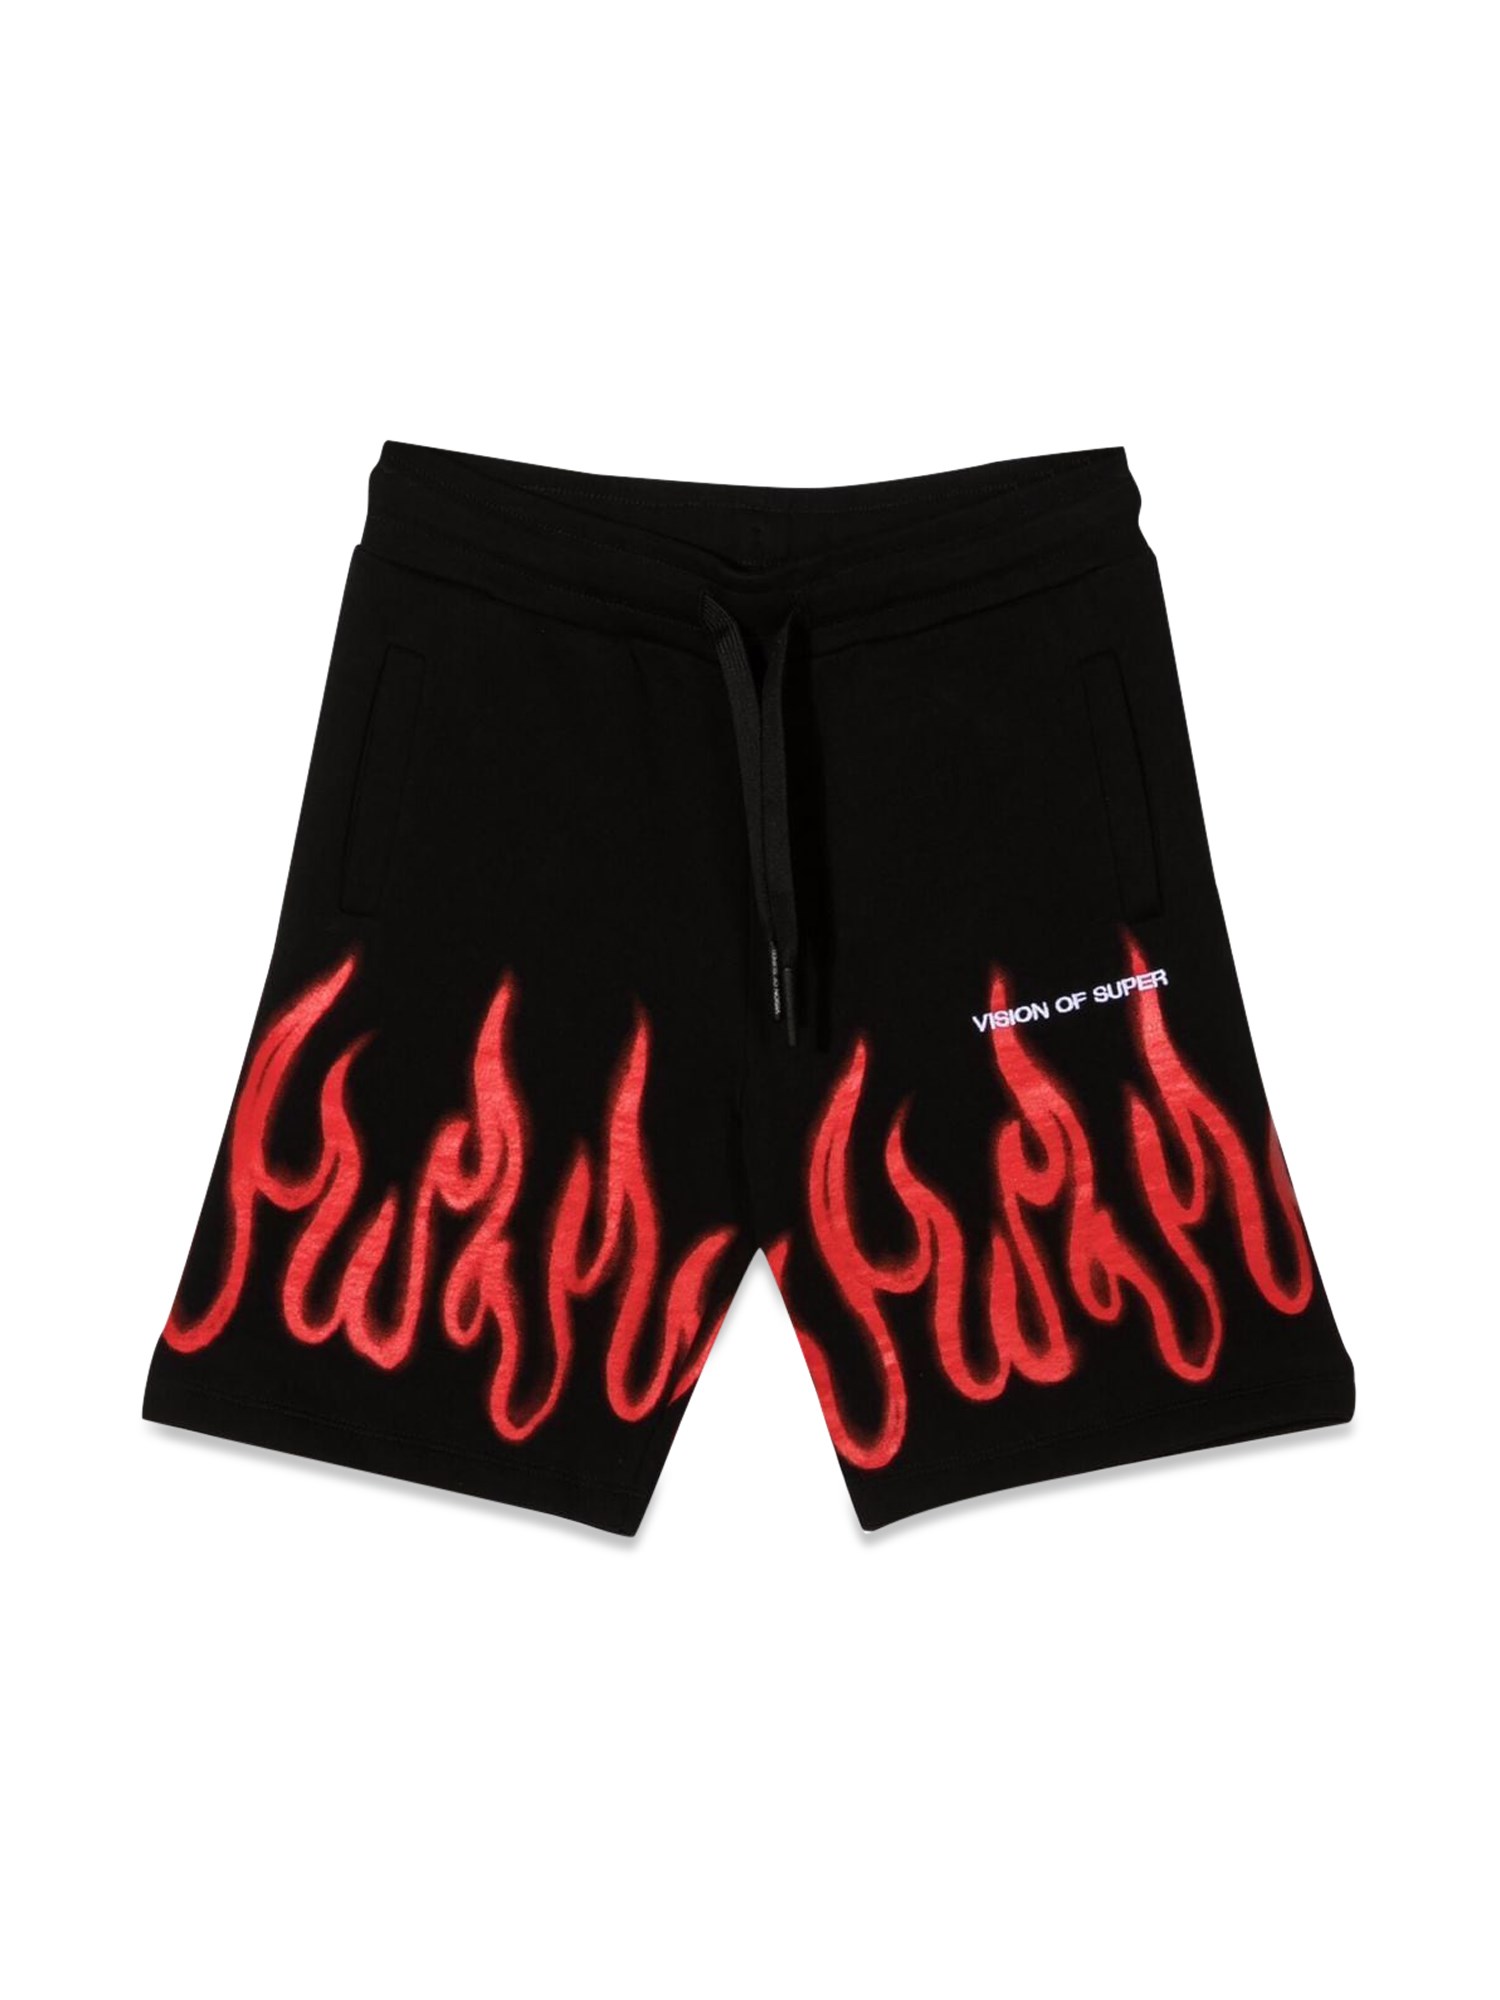 vision of super black shorts kids with red spray flames